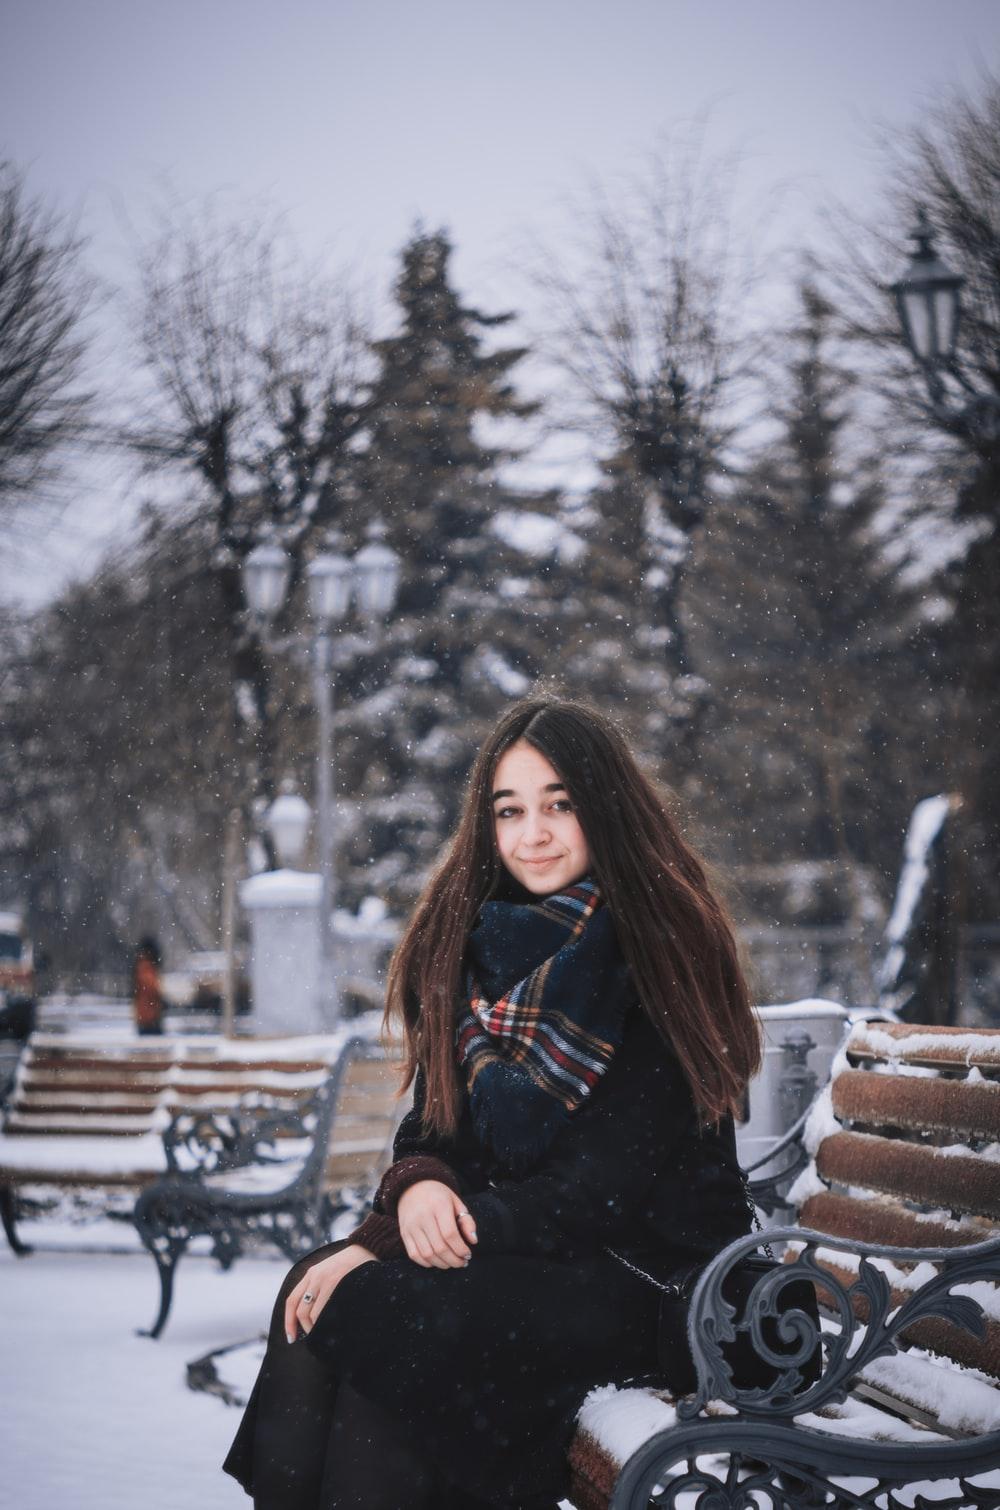 Snow Girls Picture. Download Free Image